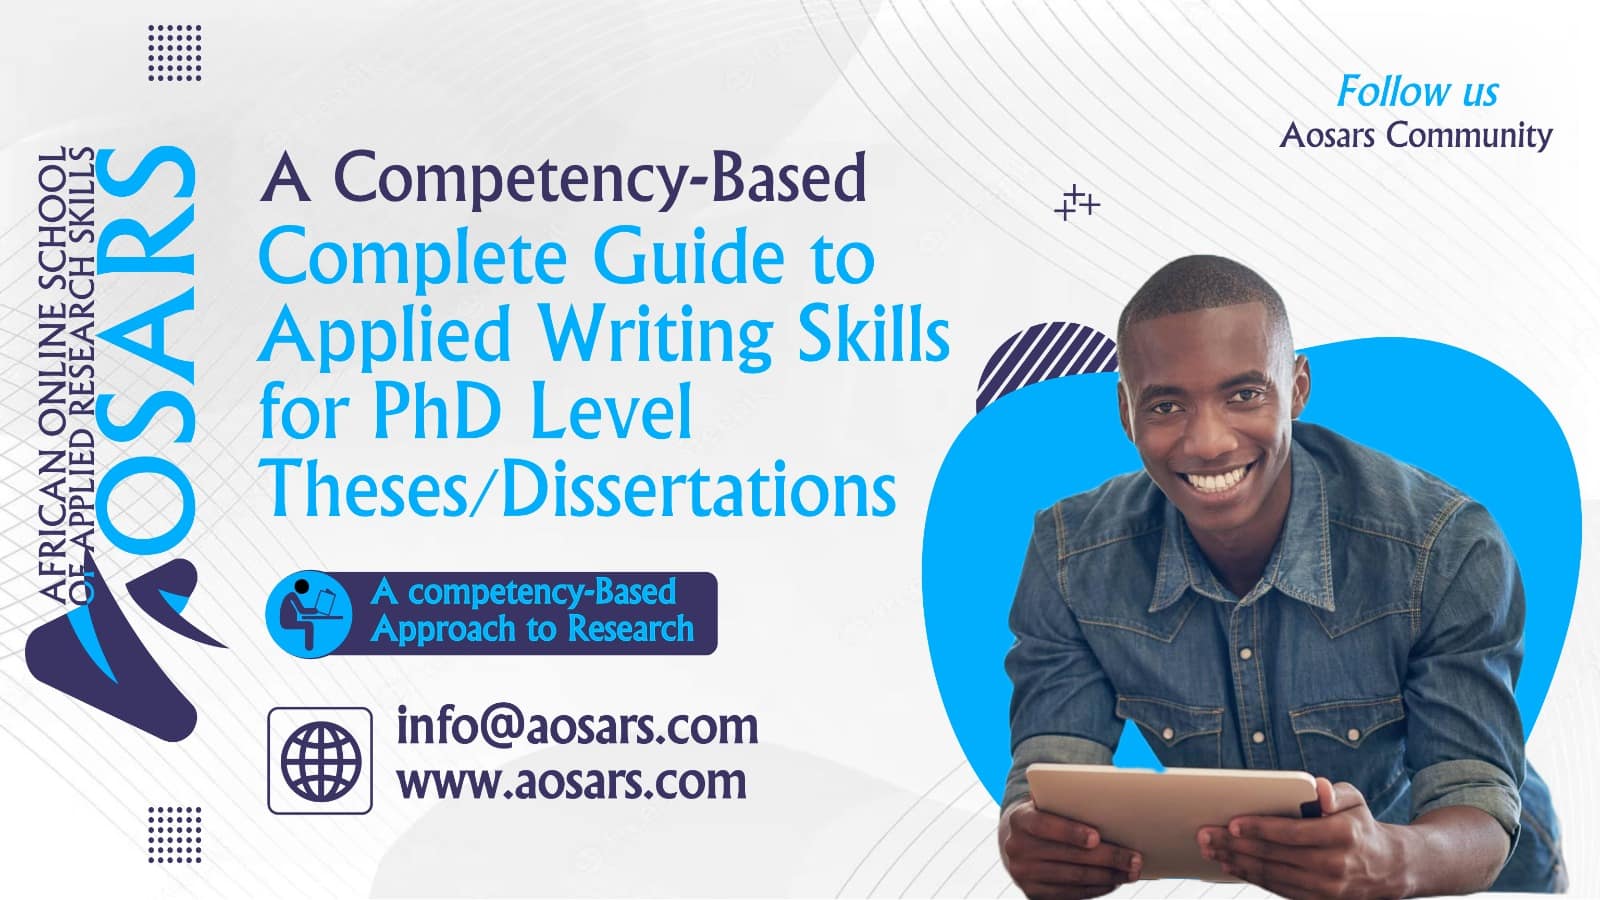 A Competency-Based Complete Guide to Applied Writing Skills for Doctorate (PhD) level Theses/Dissertations